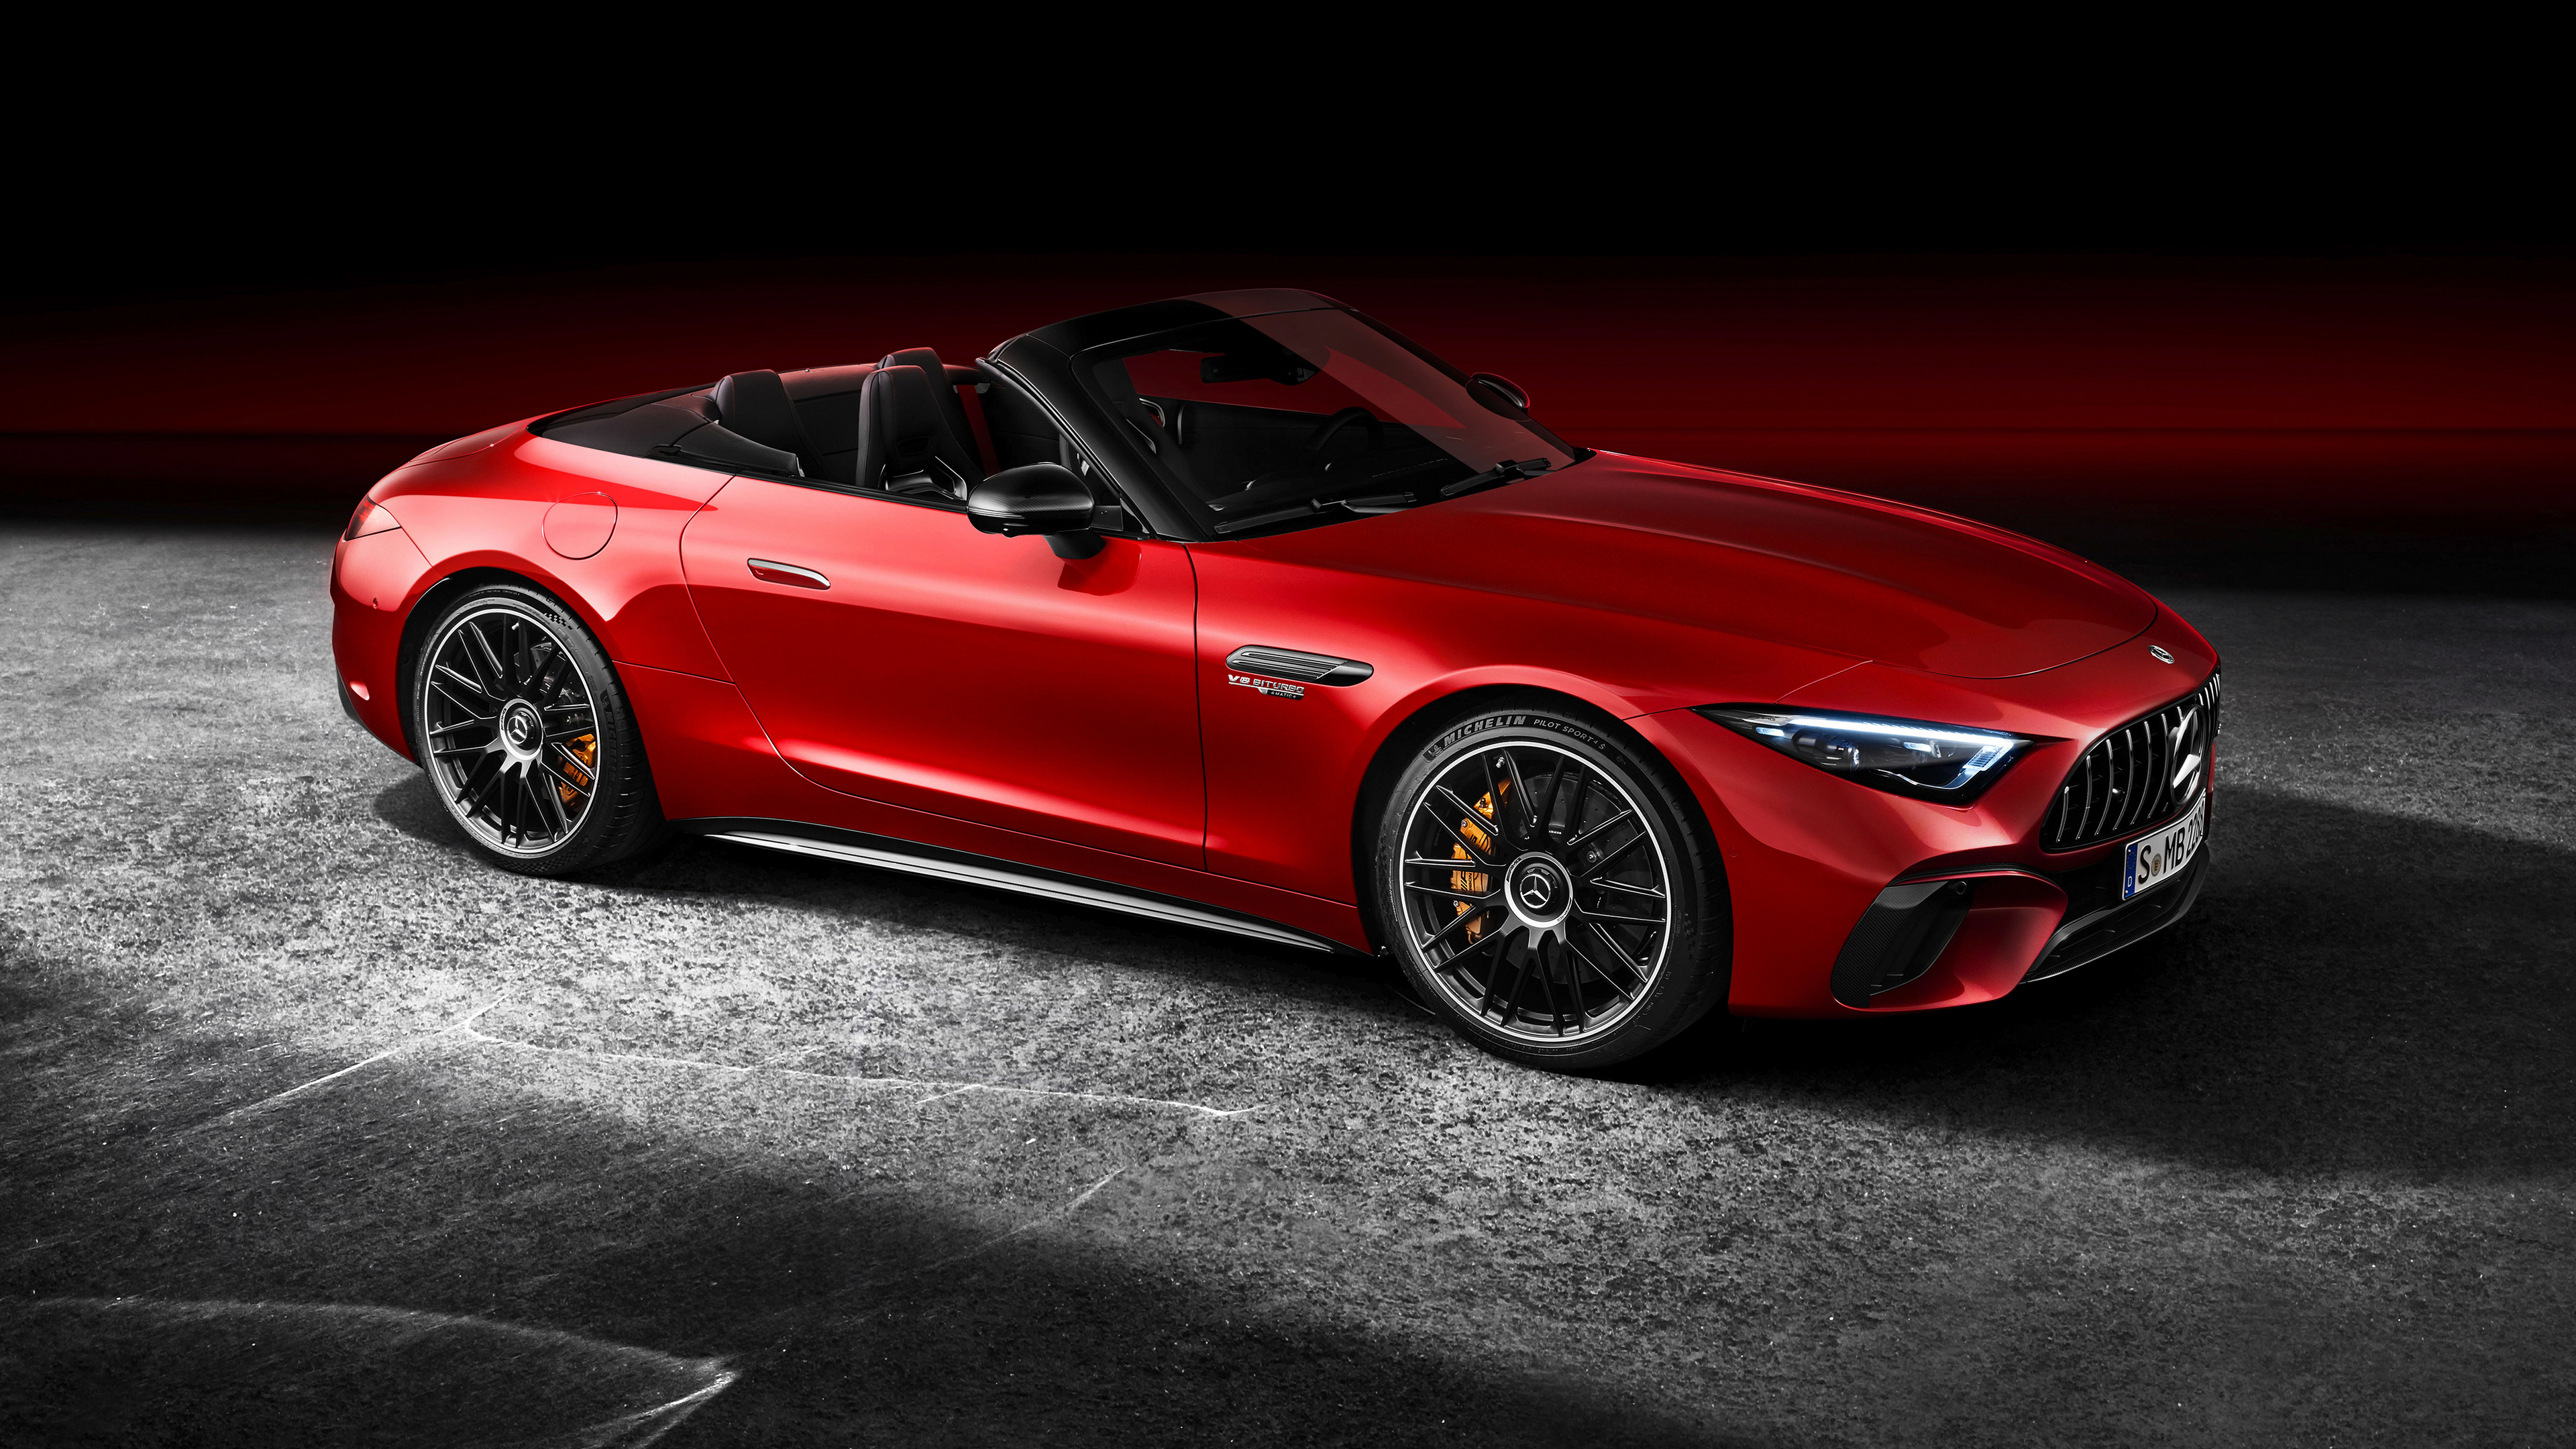 General 3840x2160 sports car Mercedes-Benz red cars vehicle car Mercedes-AMG SL German cars convertible Roadster